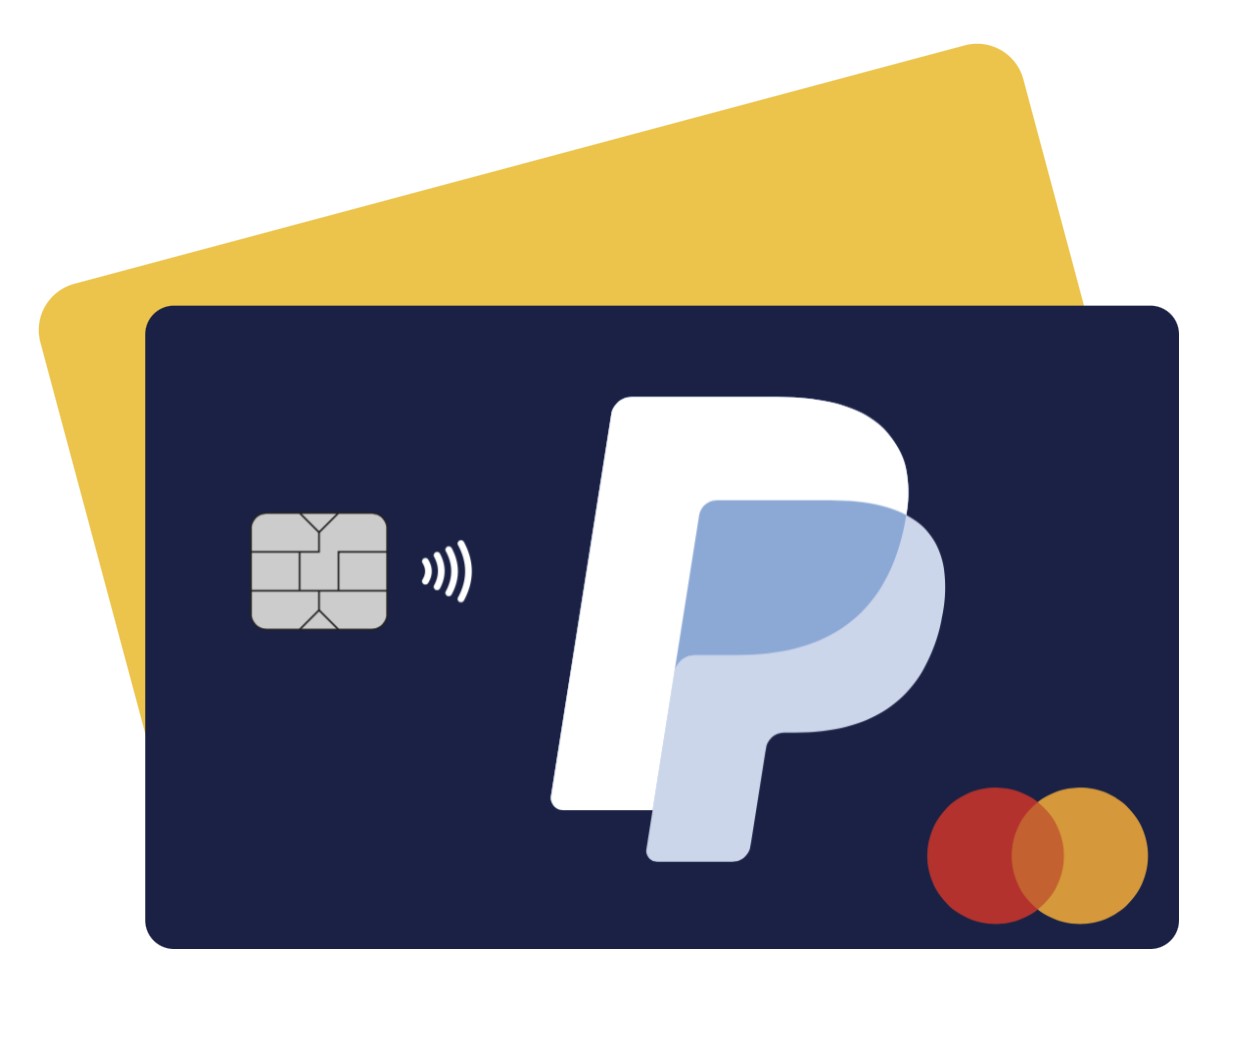 PayPal Cashback Mastercard® -  Earn Unlimited 3% cash back when you check out with PayPal* Plus, get 2% cash back on all other eligible purchases